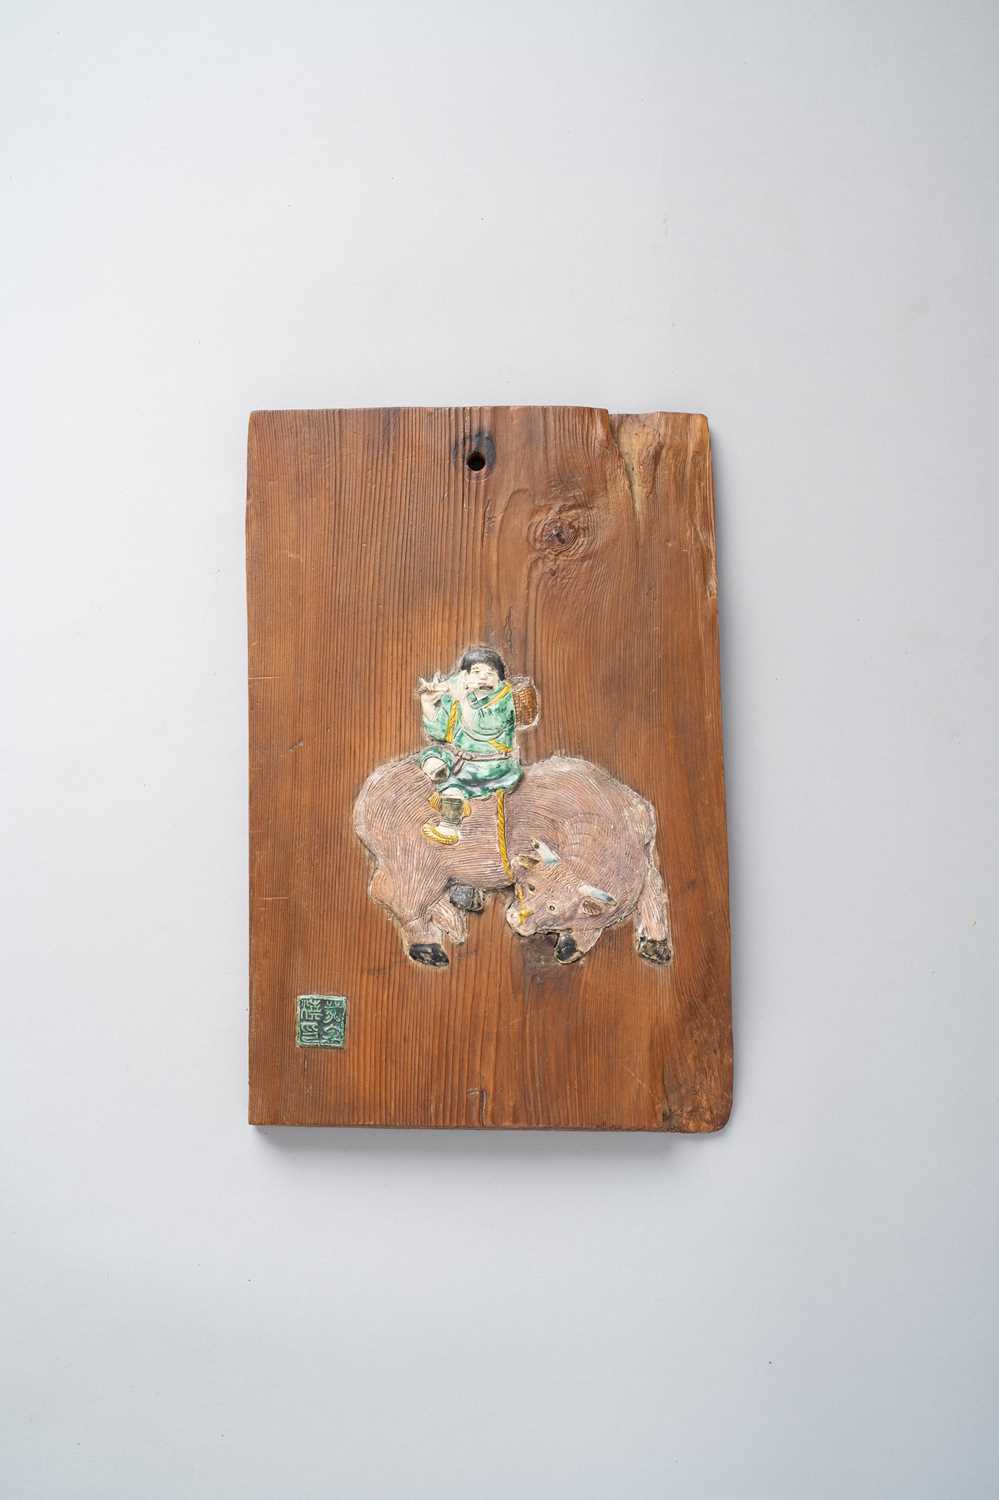 NO RESERVE A WOOD AND PORCELAIN PLAQUE 19TH OR 20TH CENTURY In the style of Ogawa Haritsu/Ritsuo, of